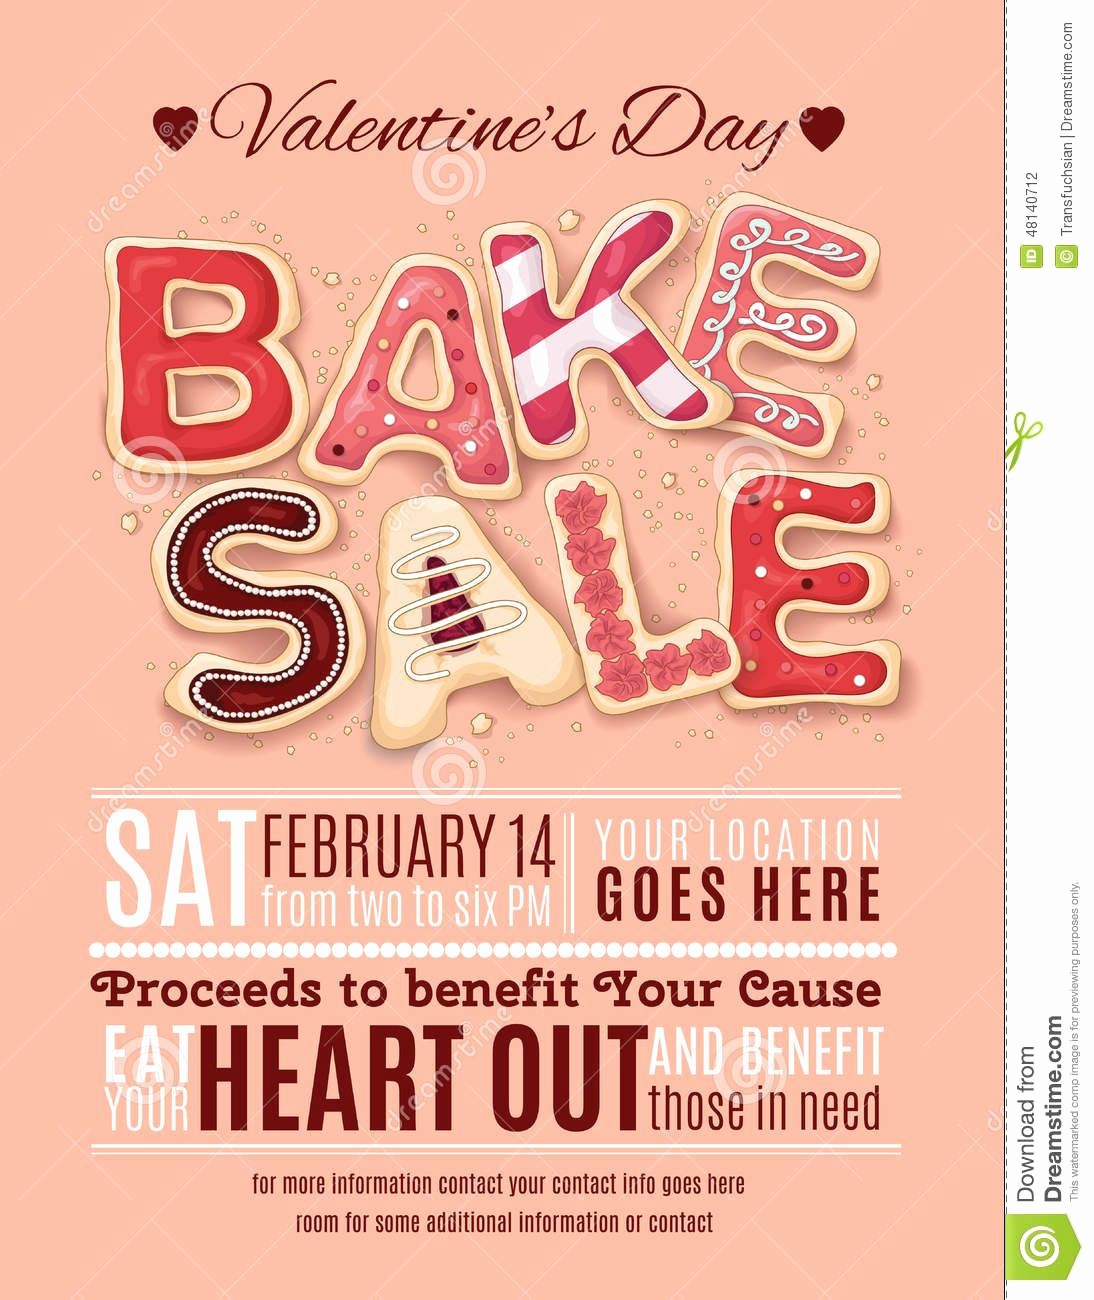 Free Poster Templates for Word Best Of Valentines Day Bake Sale Flyer Template Download From